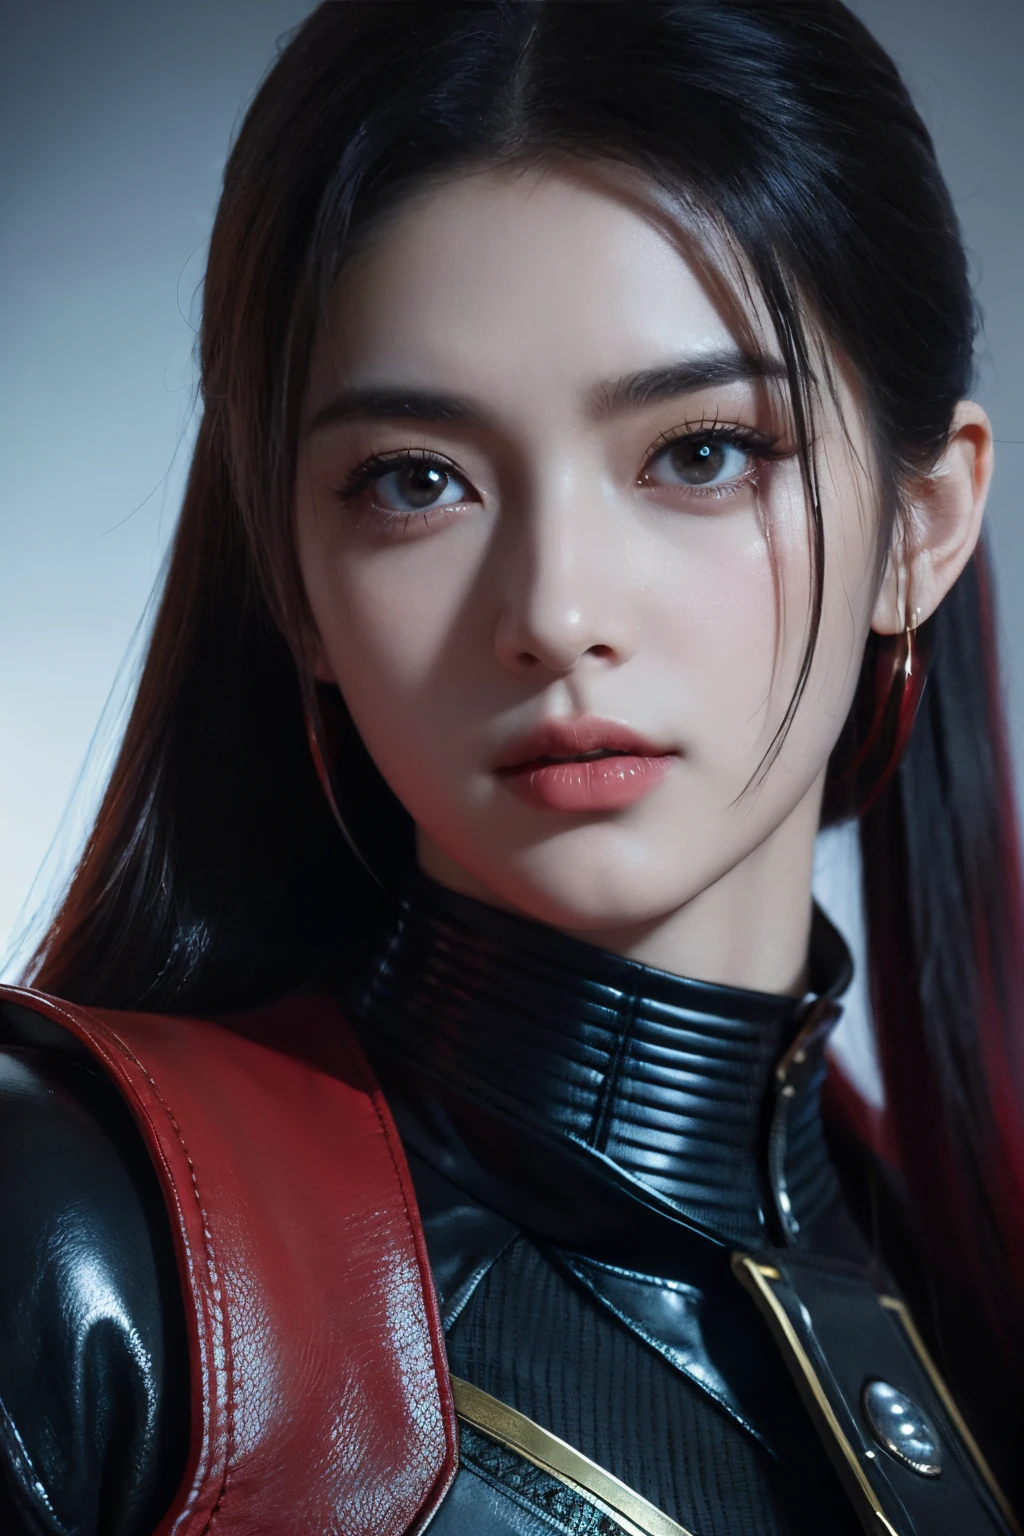 tmasterpiece,Best quality at best,A high resolution,8K,(portrait),(Close up of avatar),(RAW photogr),real photograph,digital photography,(Police officers wearing military uniforms and cyberpunk costumes),20-year-old girl,Long ponytail hairstyle,with long bangs,(Black and red gradient hair),Red eyes,A plump chest,cleavage,Elegant and serious,Dressed in military uniform,metal decoration,Intricate decoration,realistic setting,police uniforms,Keep your mouth shut,Redlip,adorable captivating,warriors,Photo pose,cyber punk perssonage,scifi style,White room,oc render reflection texture